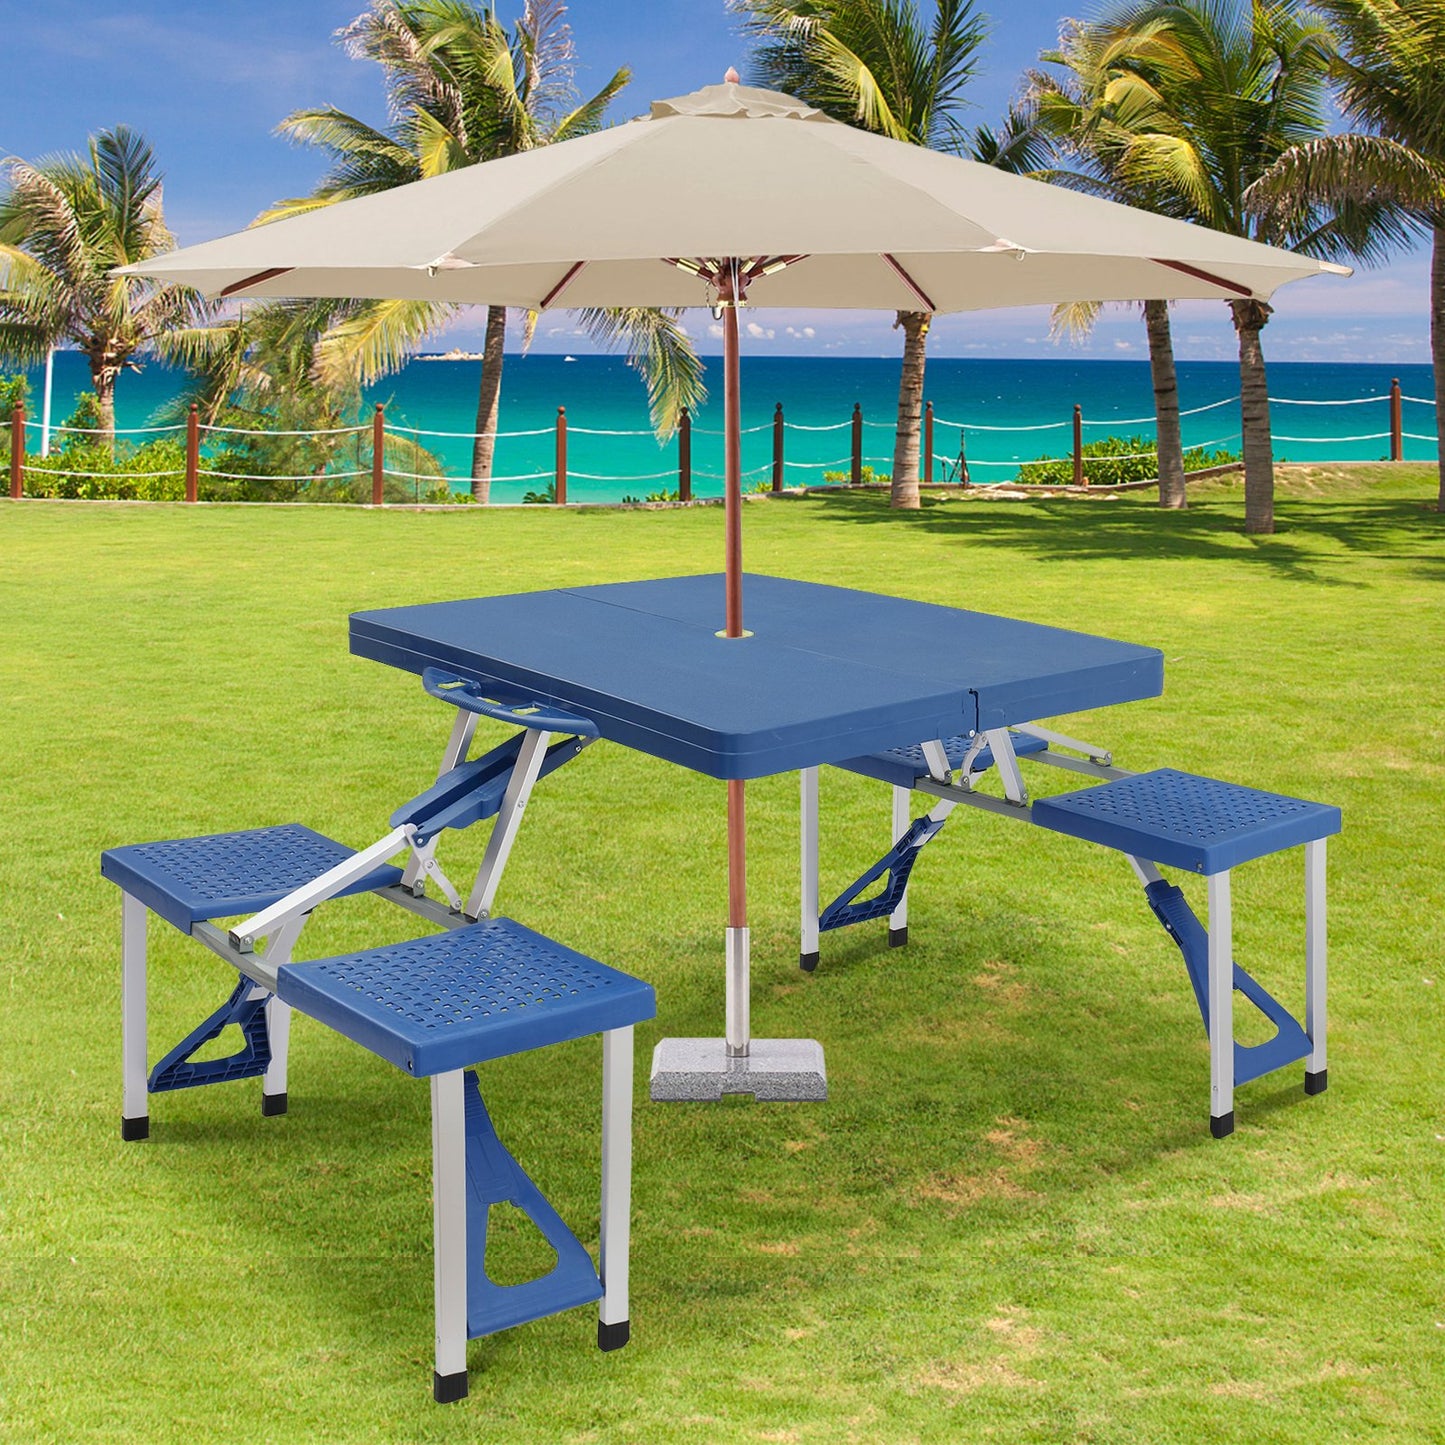 Picnic Table Foldable with Table and Chairs, Umbrella Hole, Outdoor Table and Chair Set with 4 Seaters for Barbecue, Travel, Camping